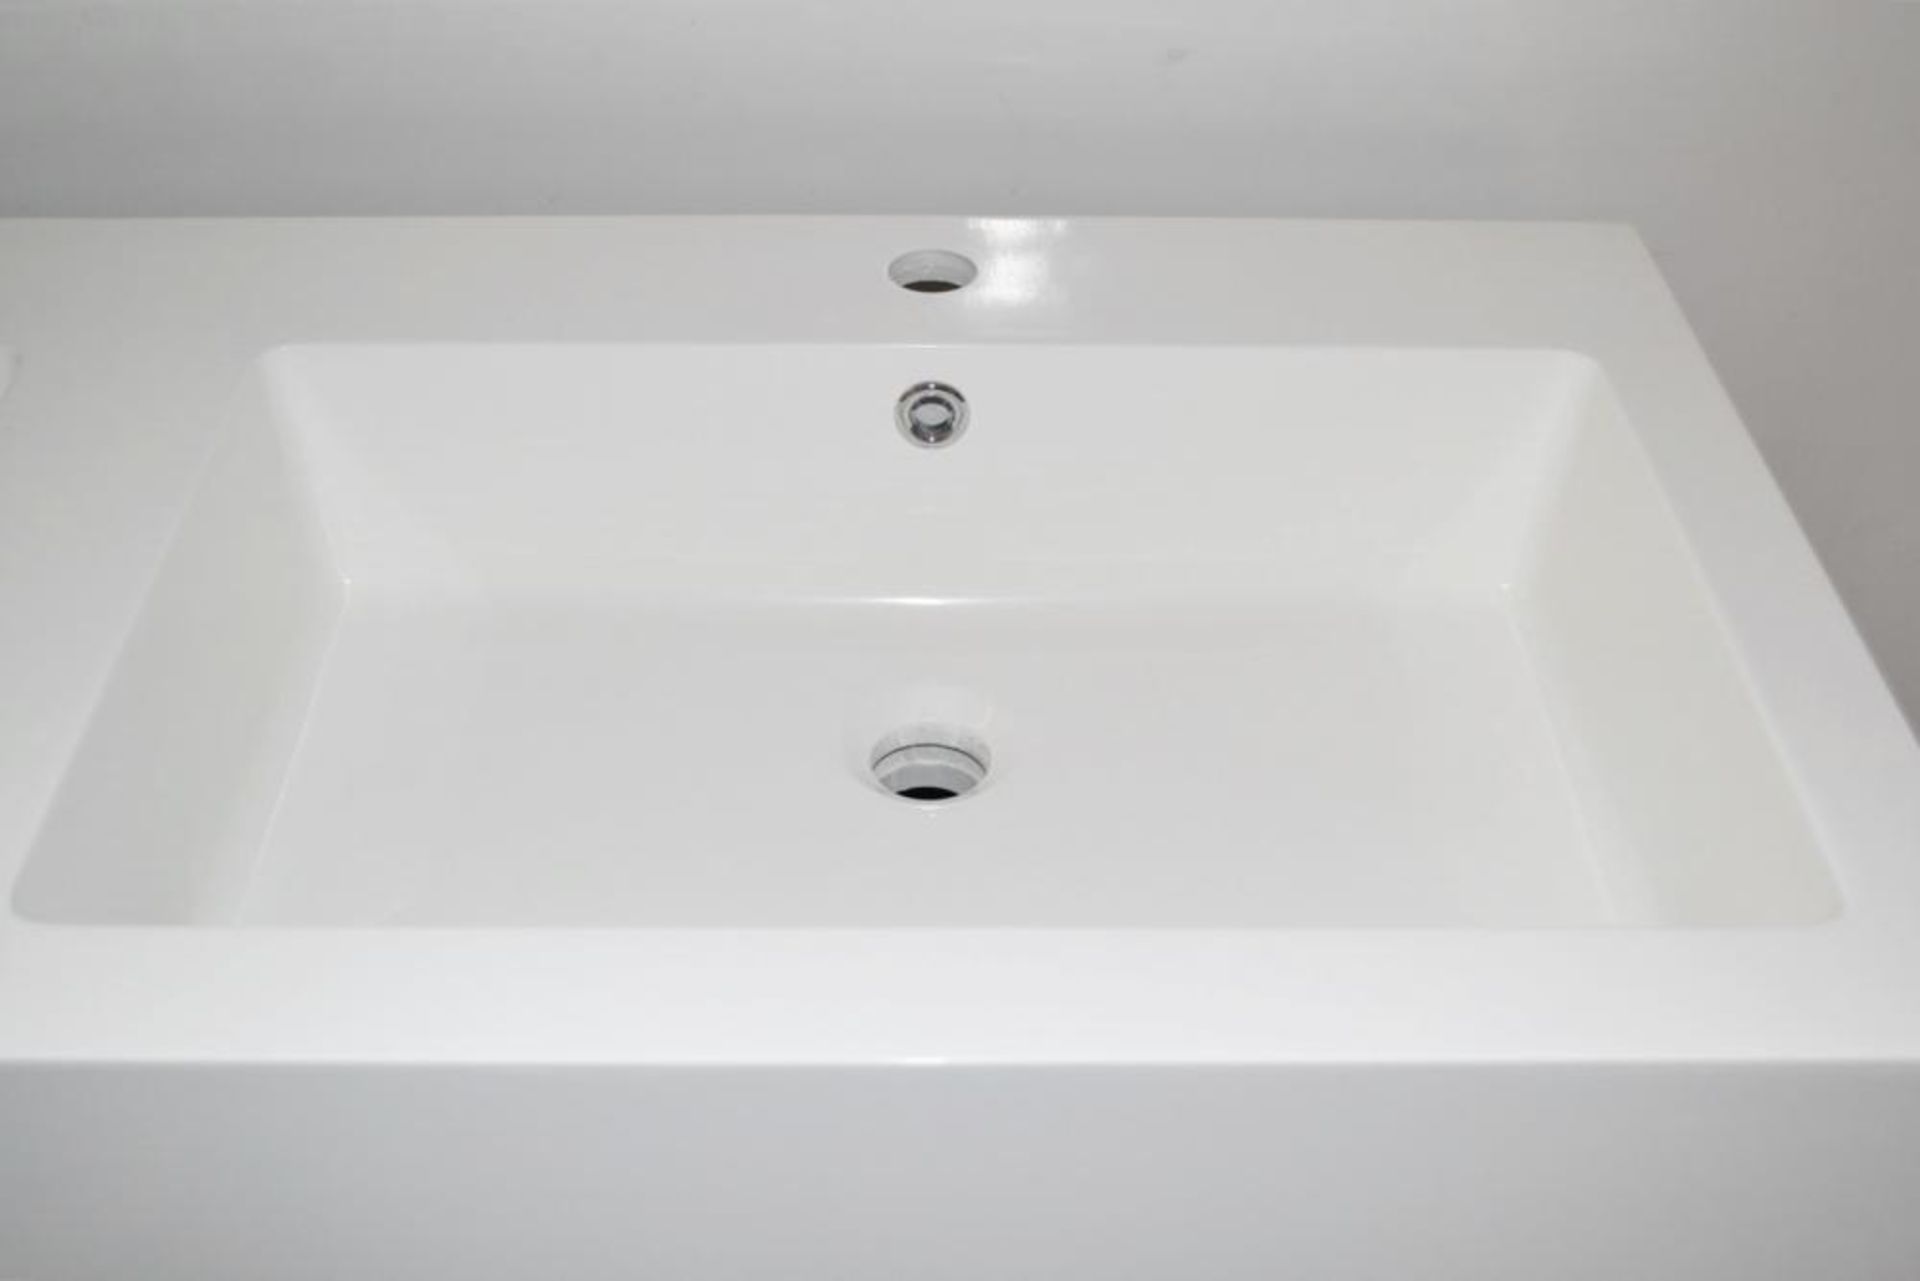 1 x Gloss White 1200mm 4-Door Double Basin Freestanding Bathroom Cabinet - New & Boxed Stock - CL307 - Image 5 of 7